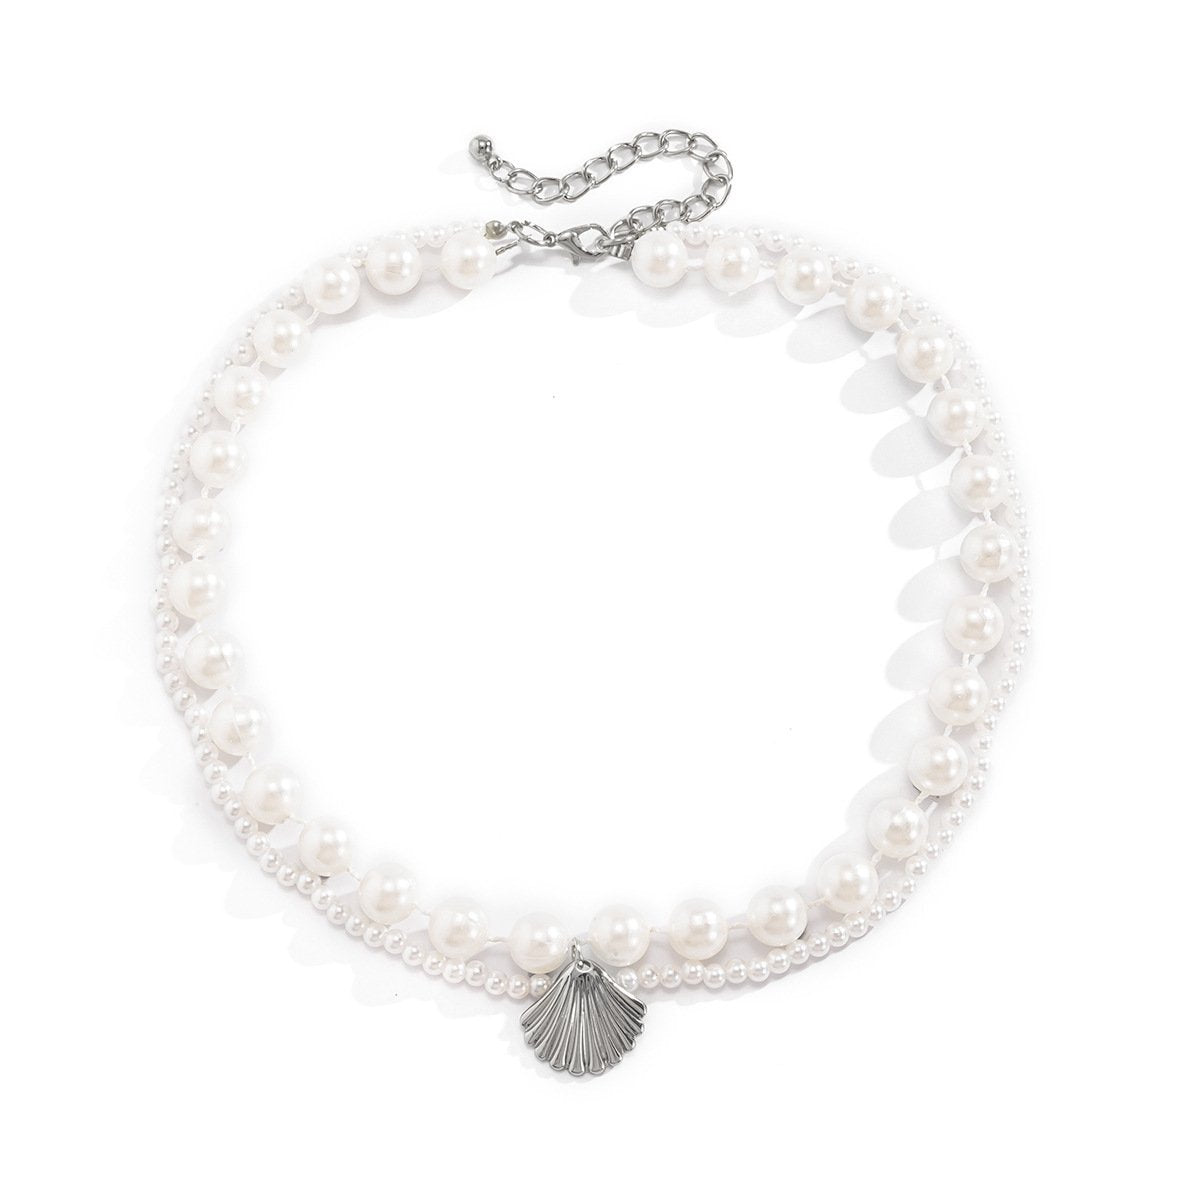 Elegant Artificial Pearl Necklaces for Women-Necklaces-JEWELRYSHEOWN